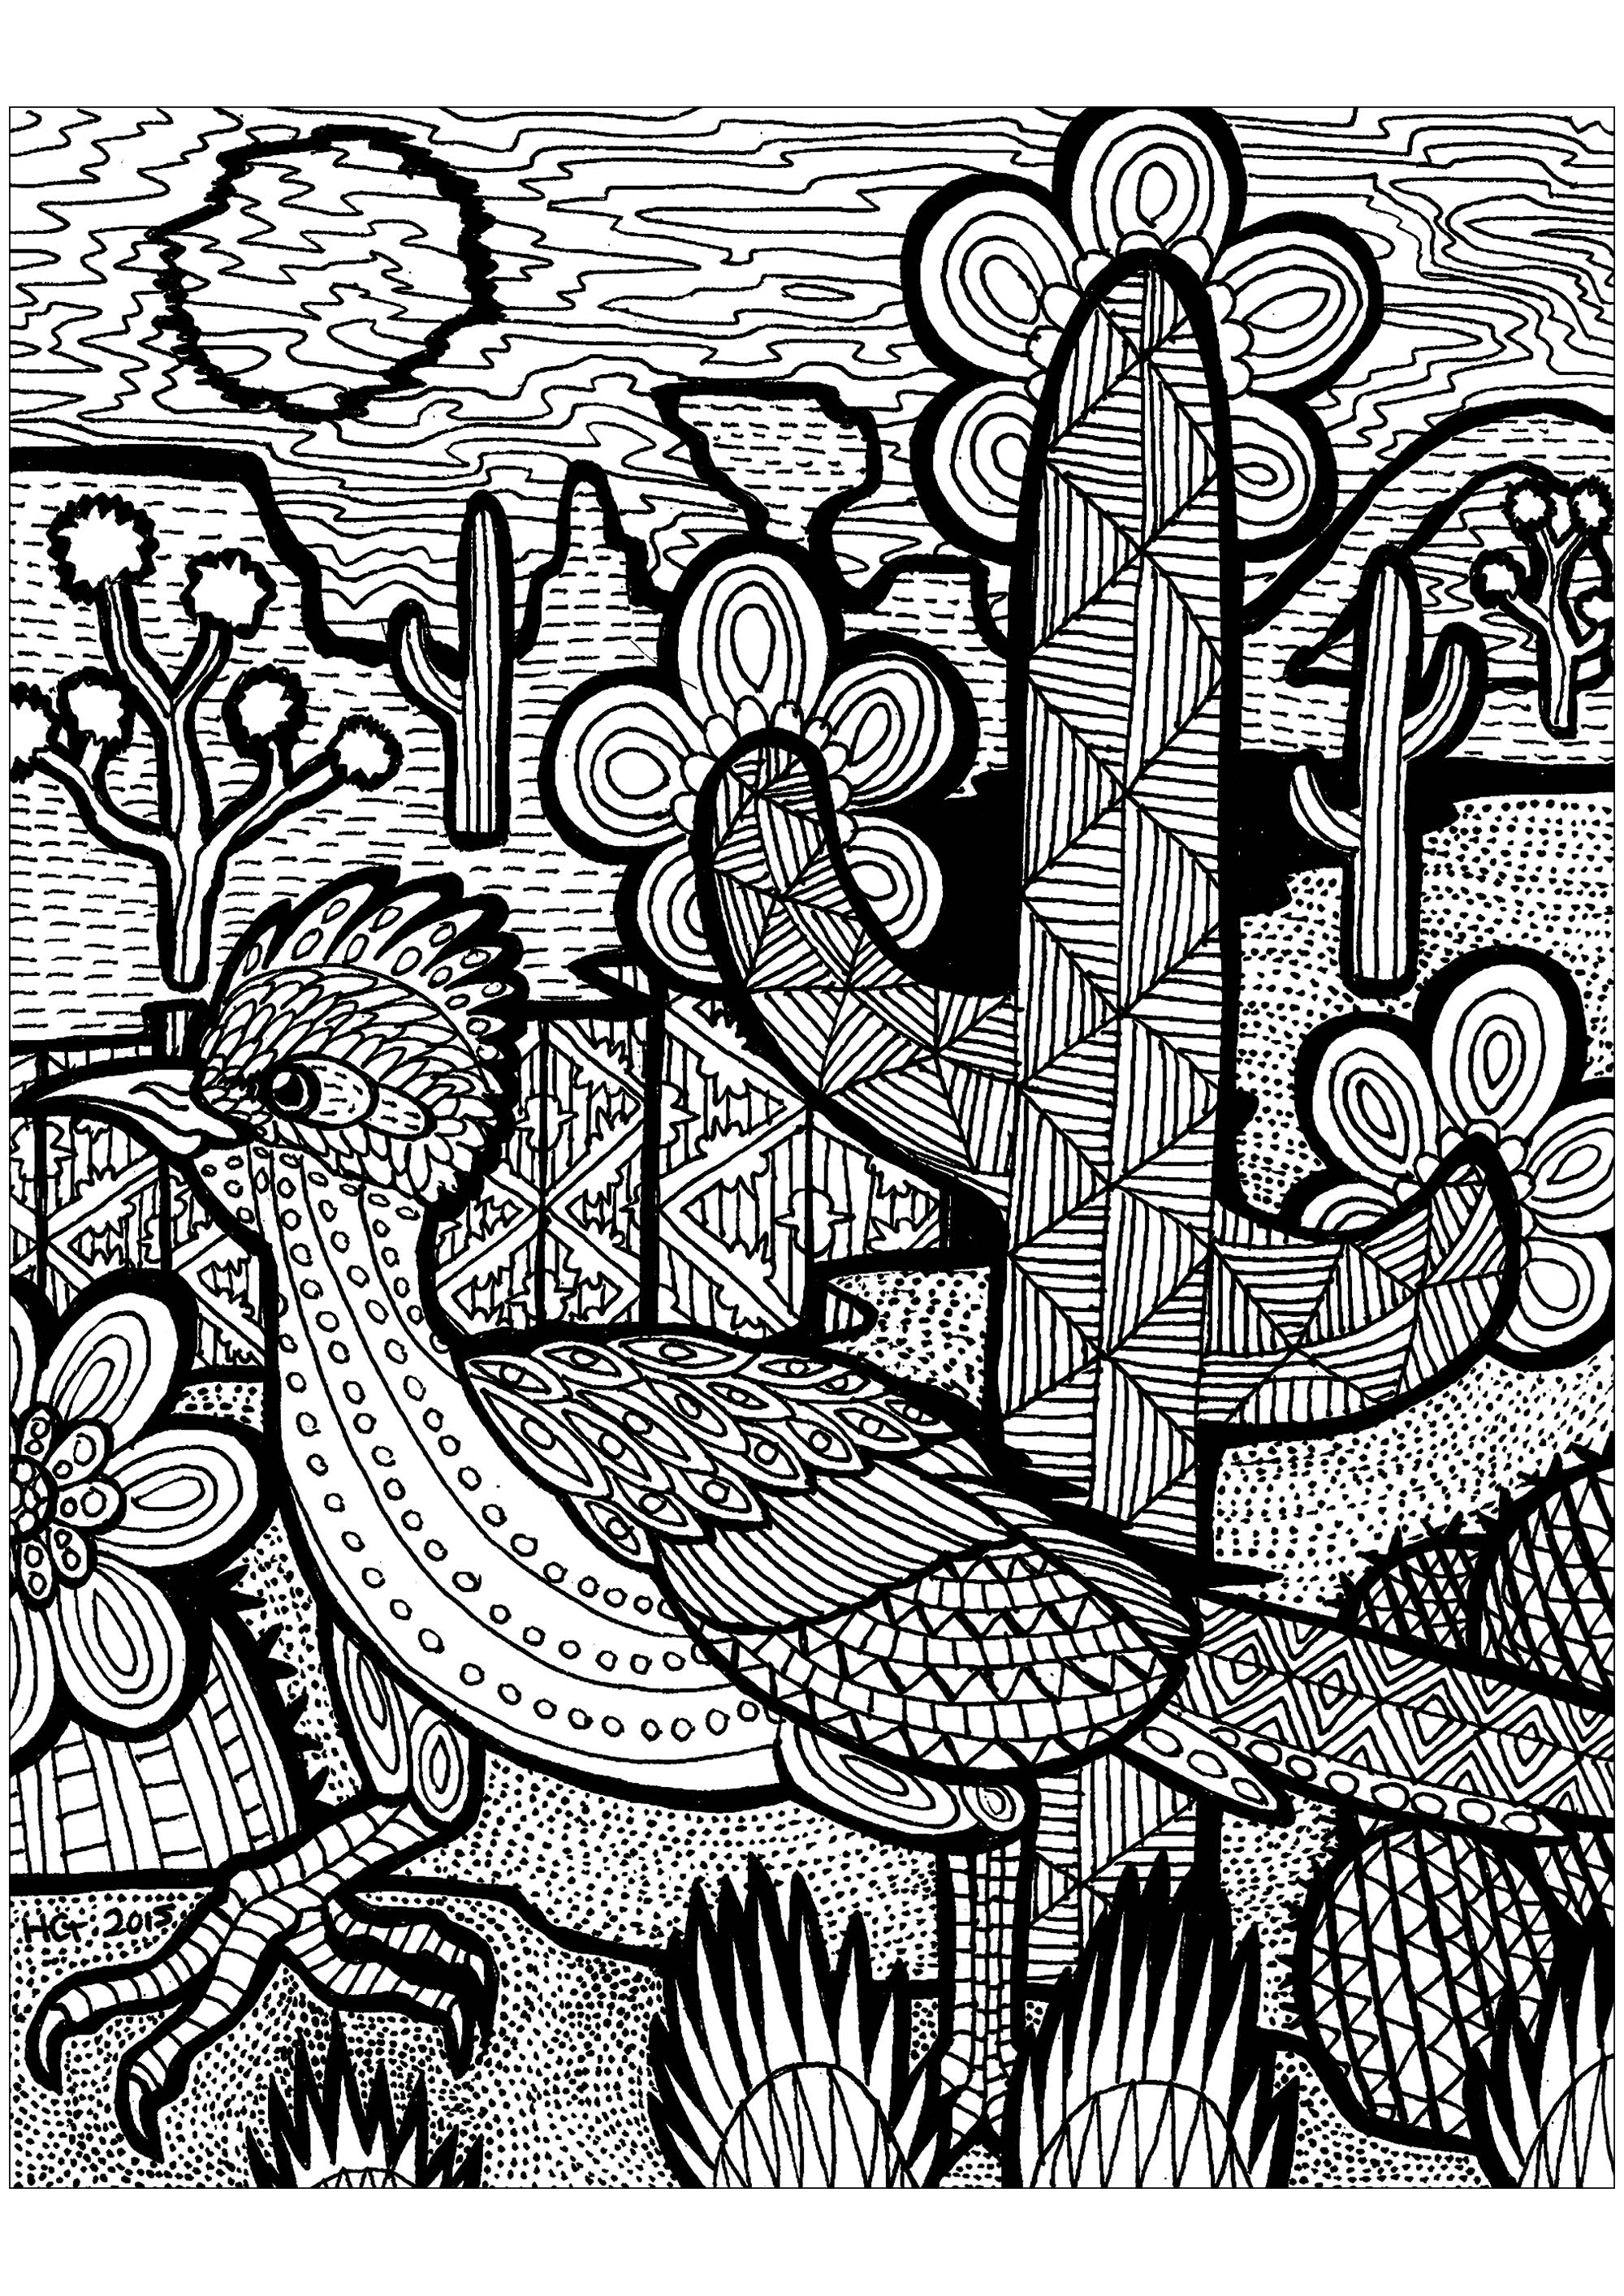 This beautiful bird needs some colors to find its way on the desert !, Artist : HGCreative. Arts